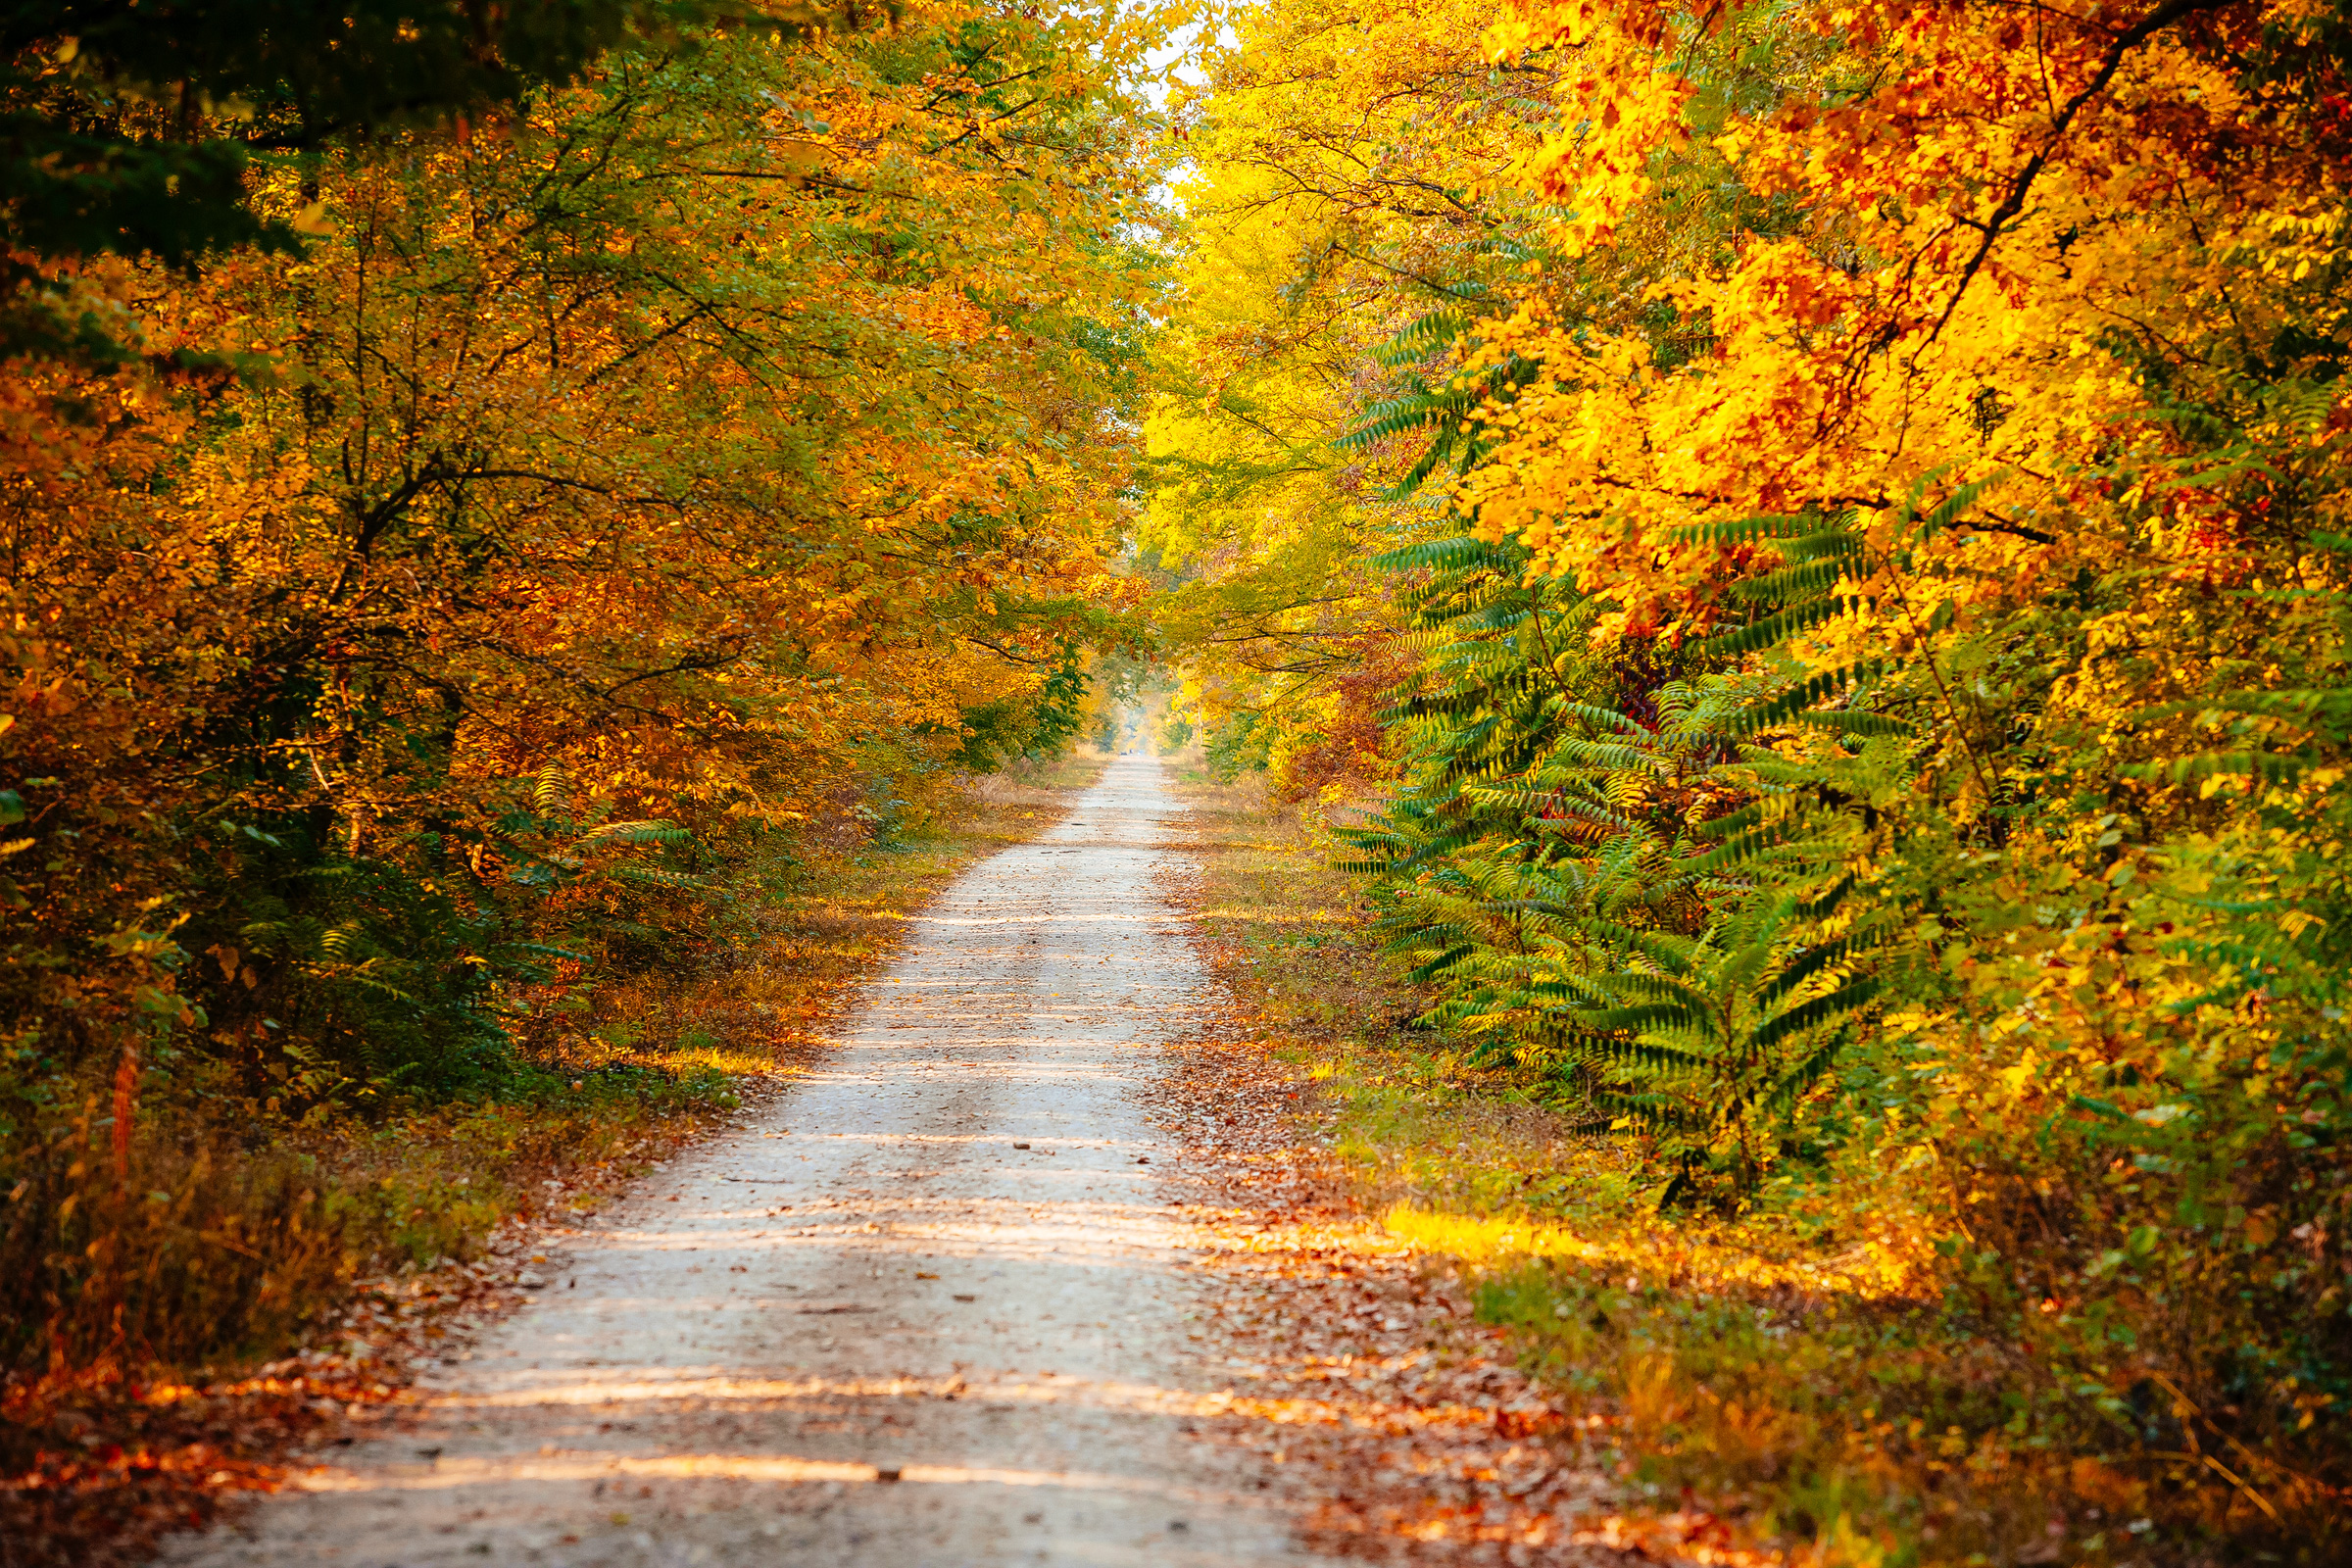 Autumn forest landscape with a road